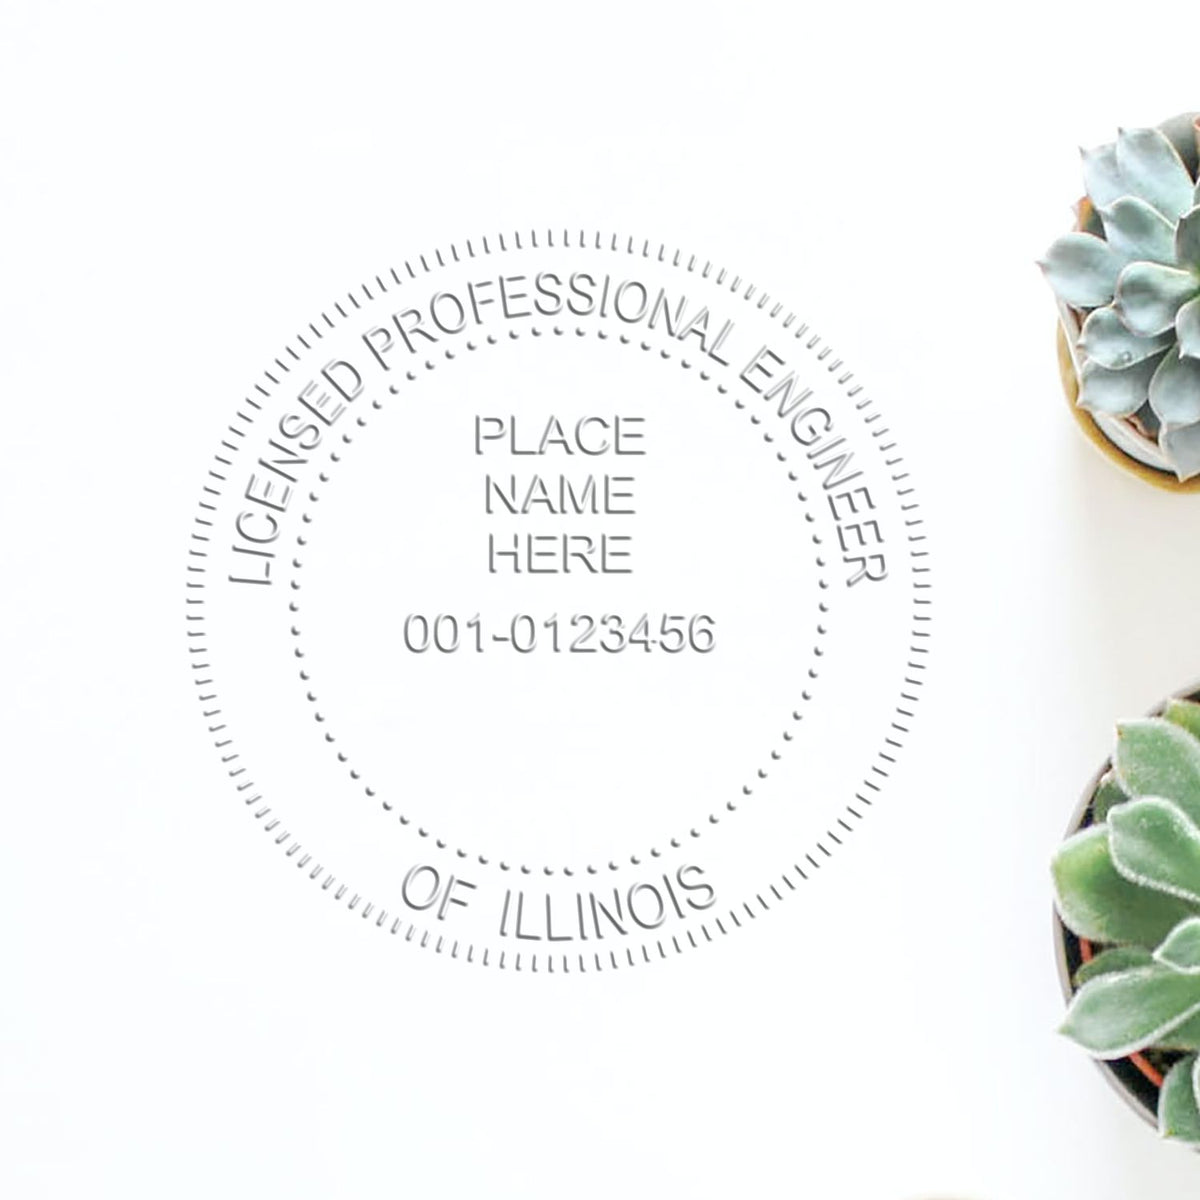 A stamped impression of the Soft Illinois Professional Engineer Seal in this stylish lifestyle photo, setting the tone for a unique and personalized product.